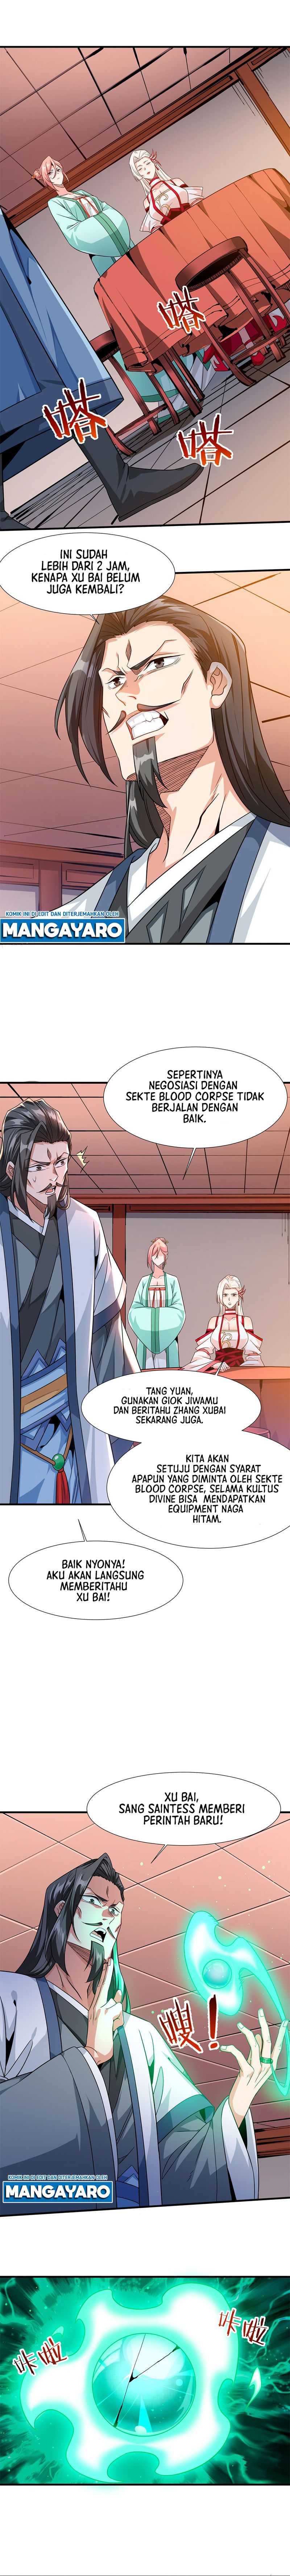 Without a Daoist Partner, I Will Die Chapter 77